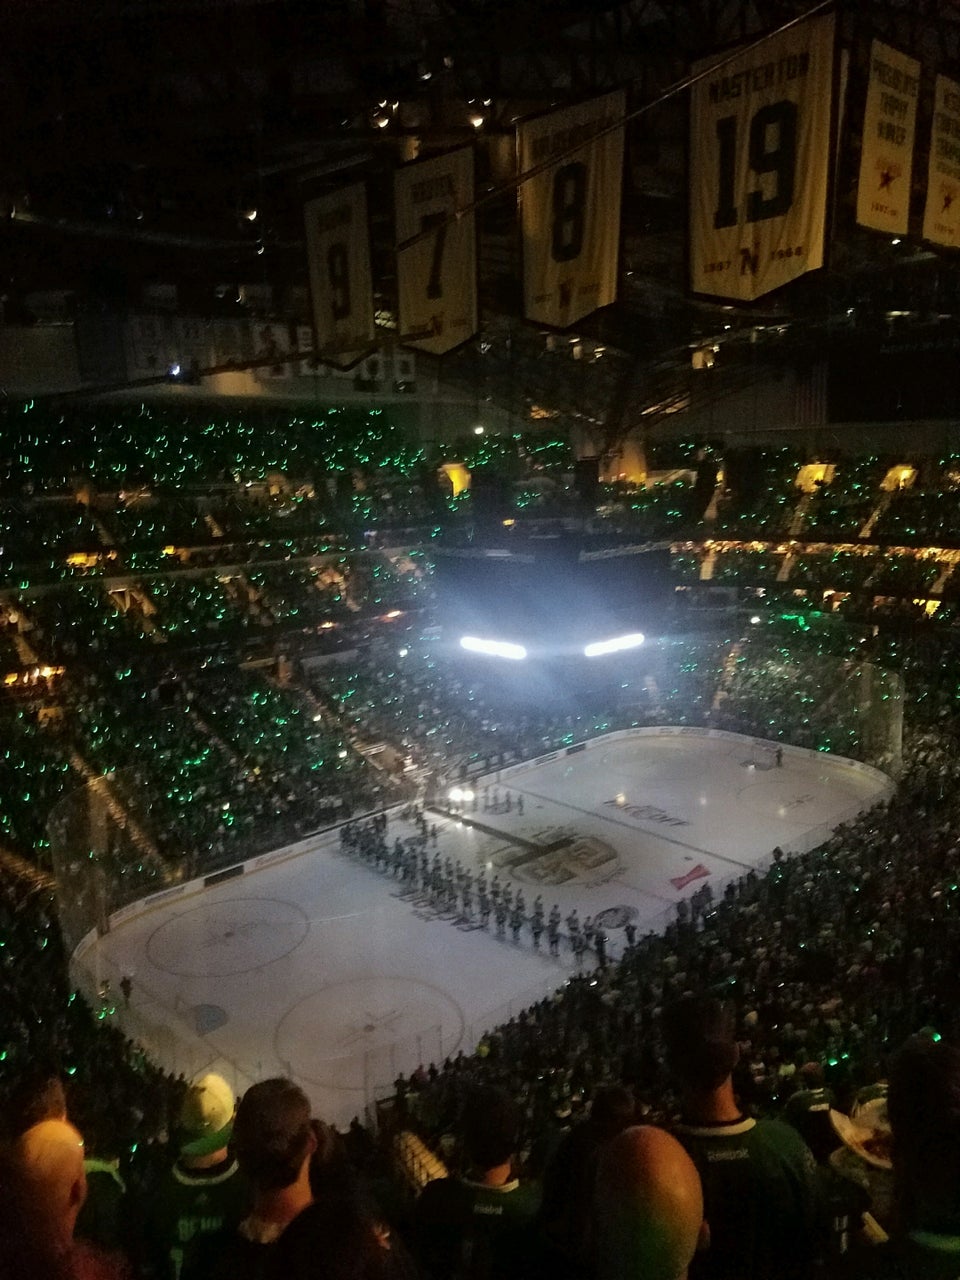 Photo of American Airlines Center